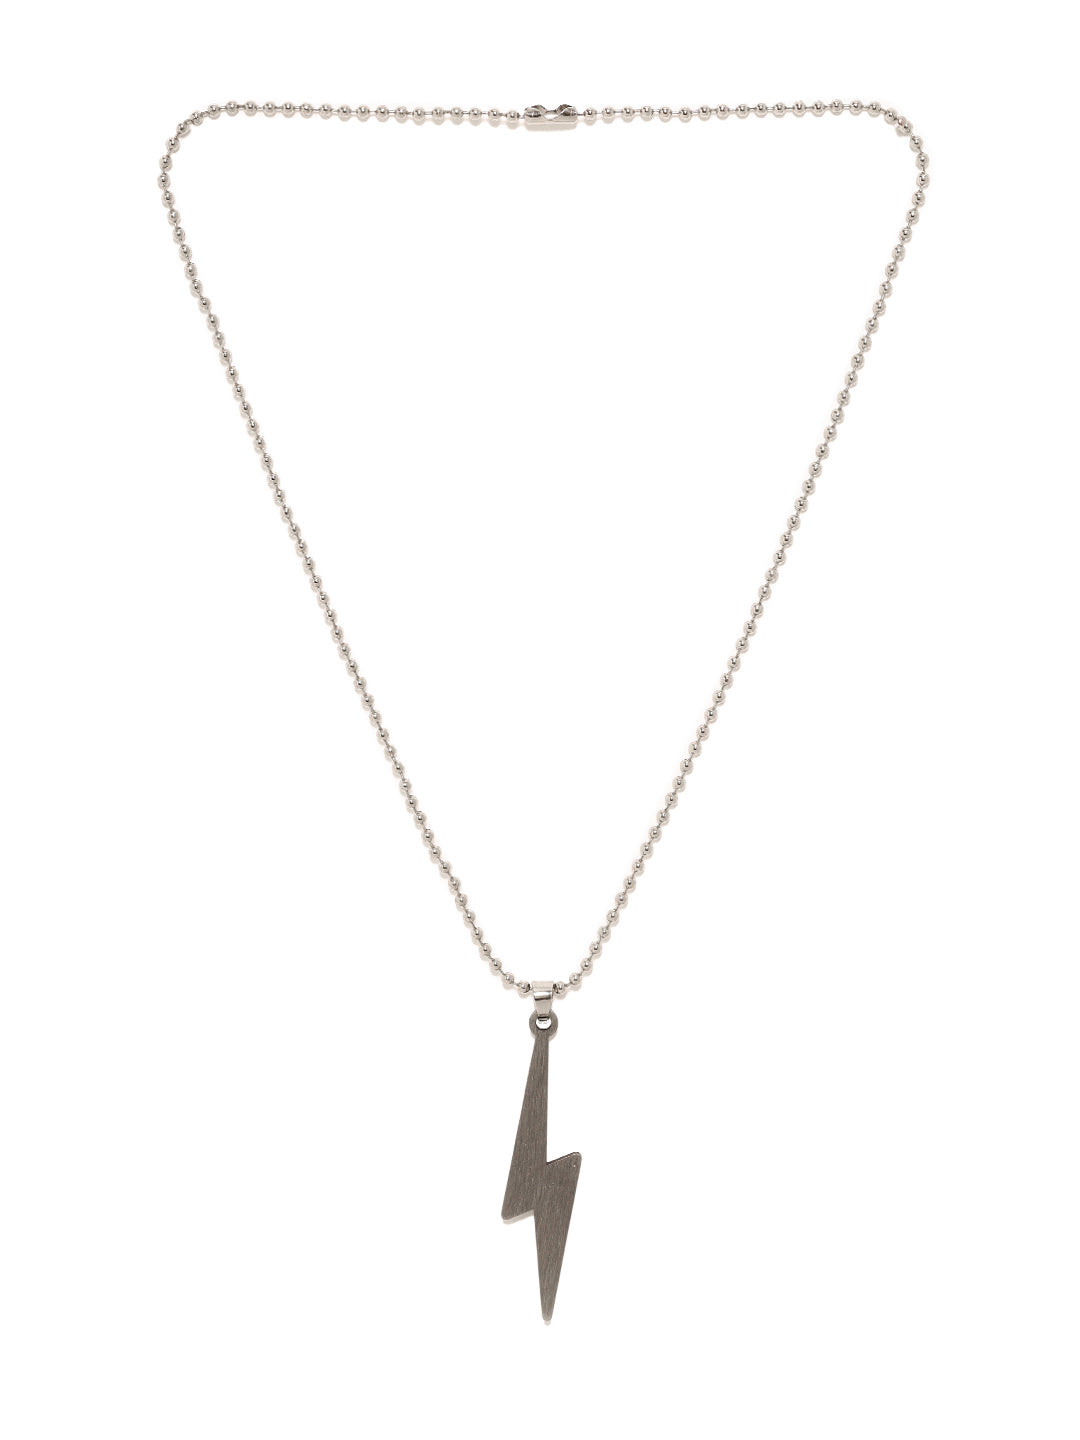 Bold by Priyaasi A Thunder Struck Men's Silver-Plated Chain